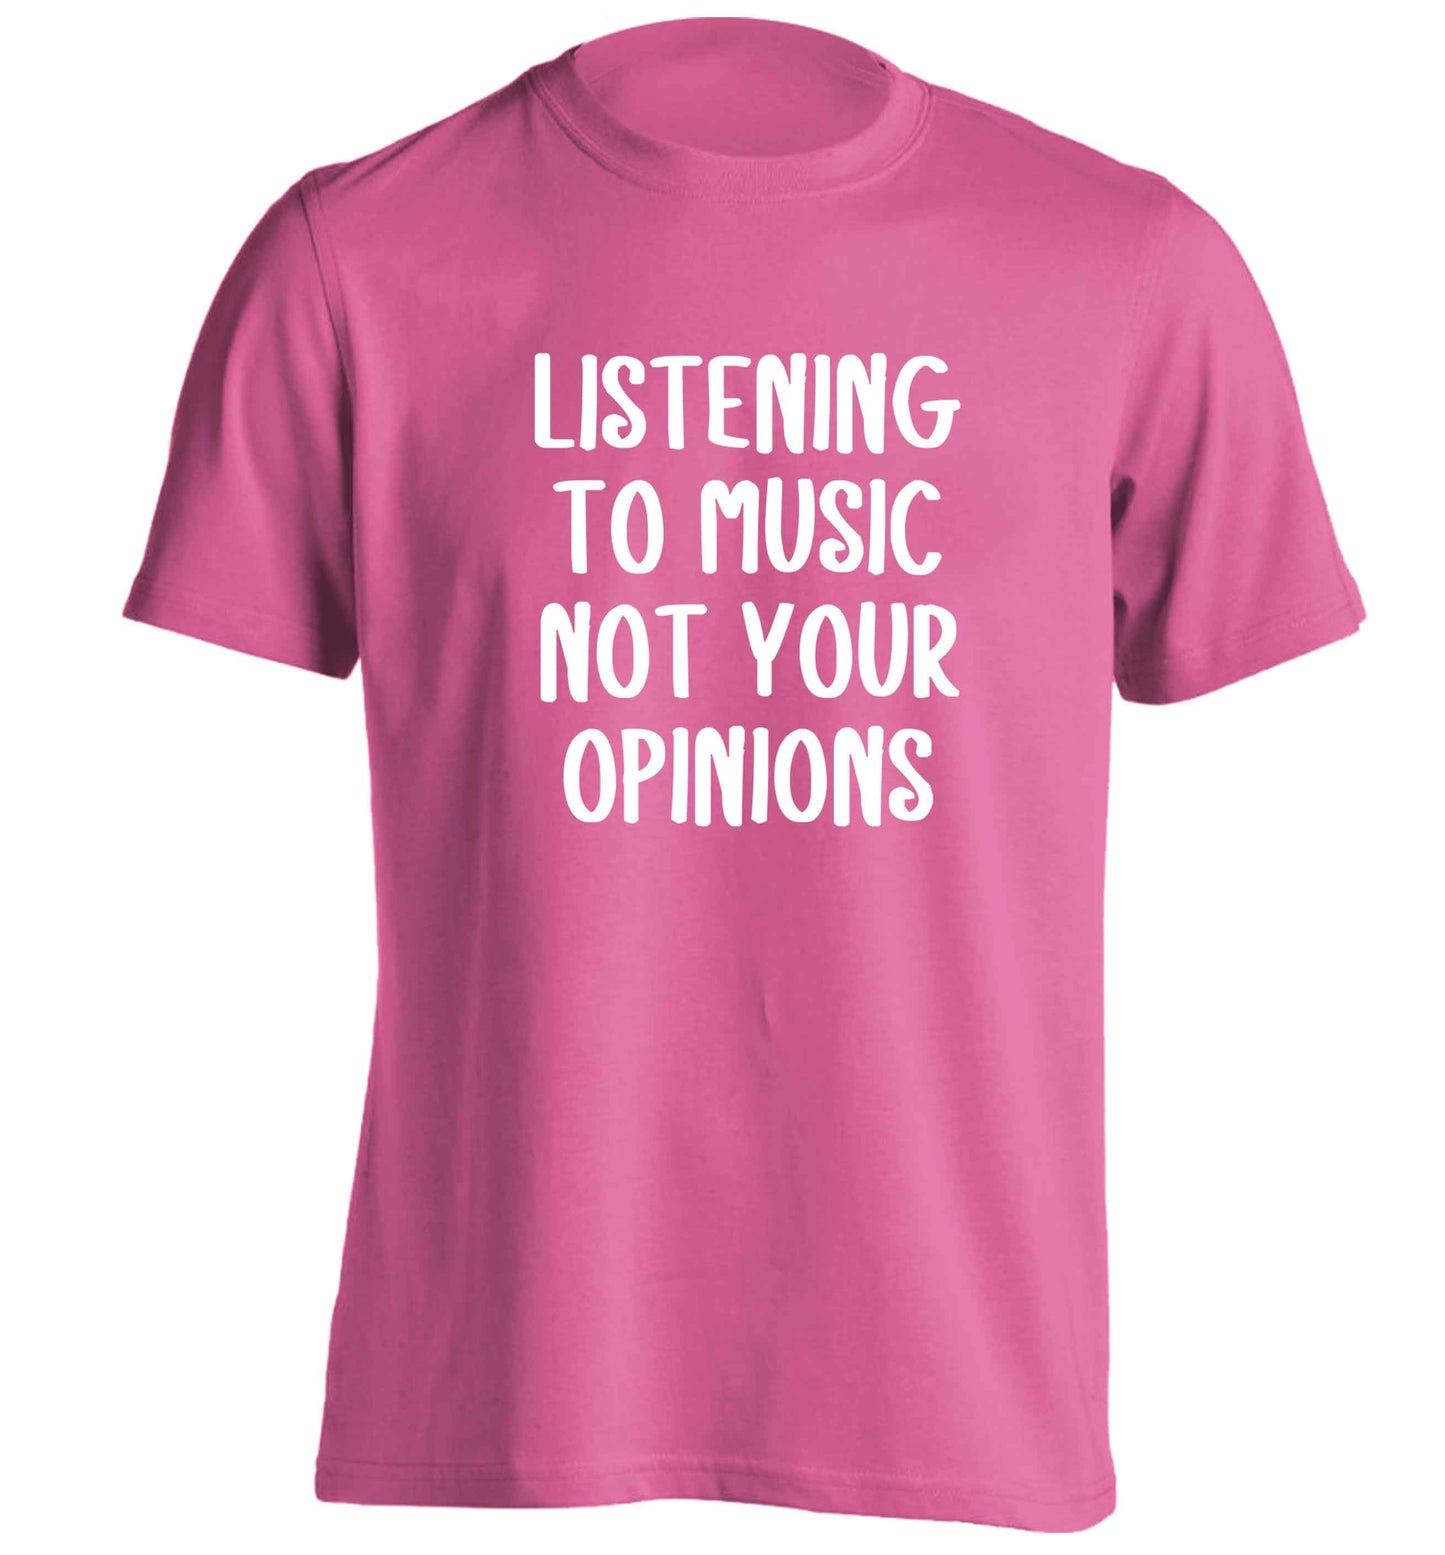 Listening to music not your opinions adults unisex pink Tshirt 2XL